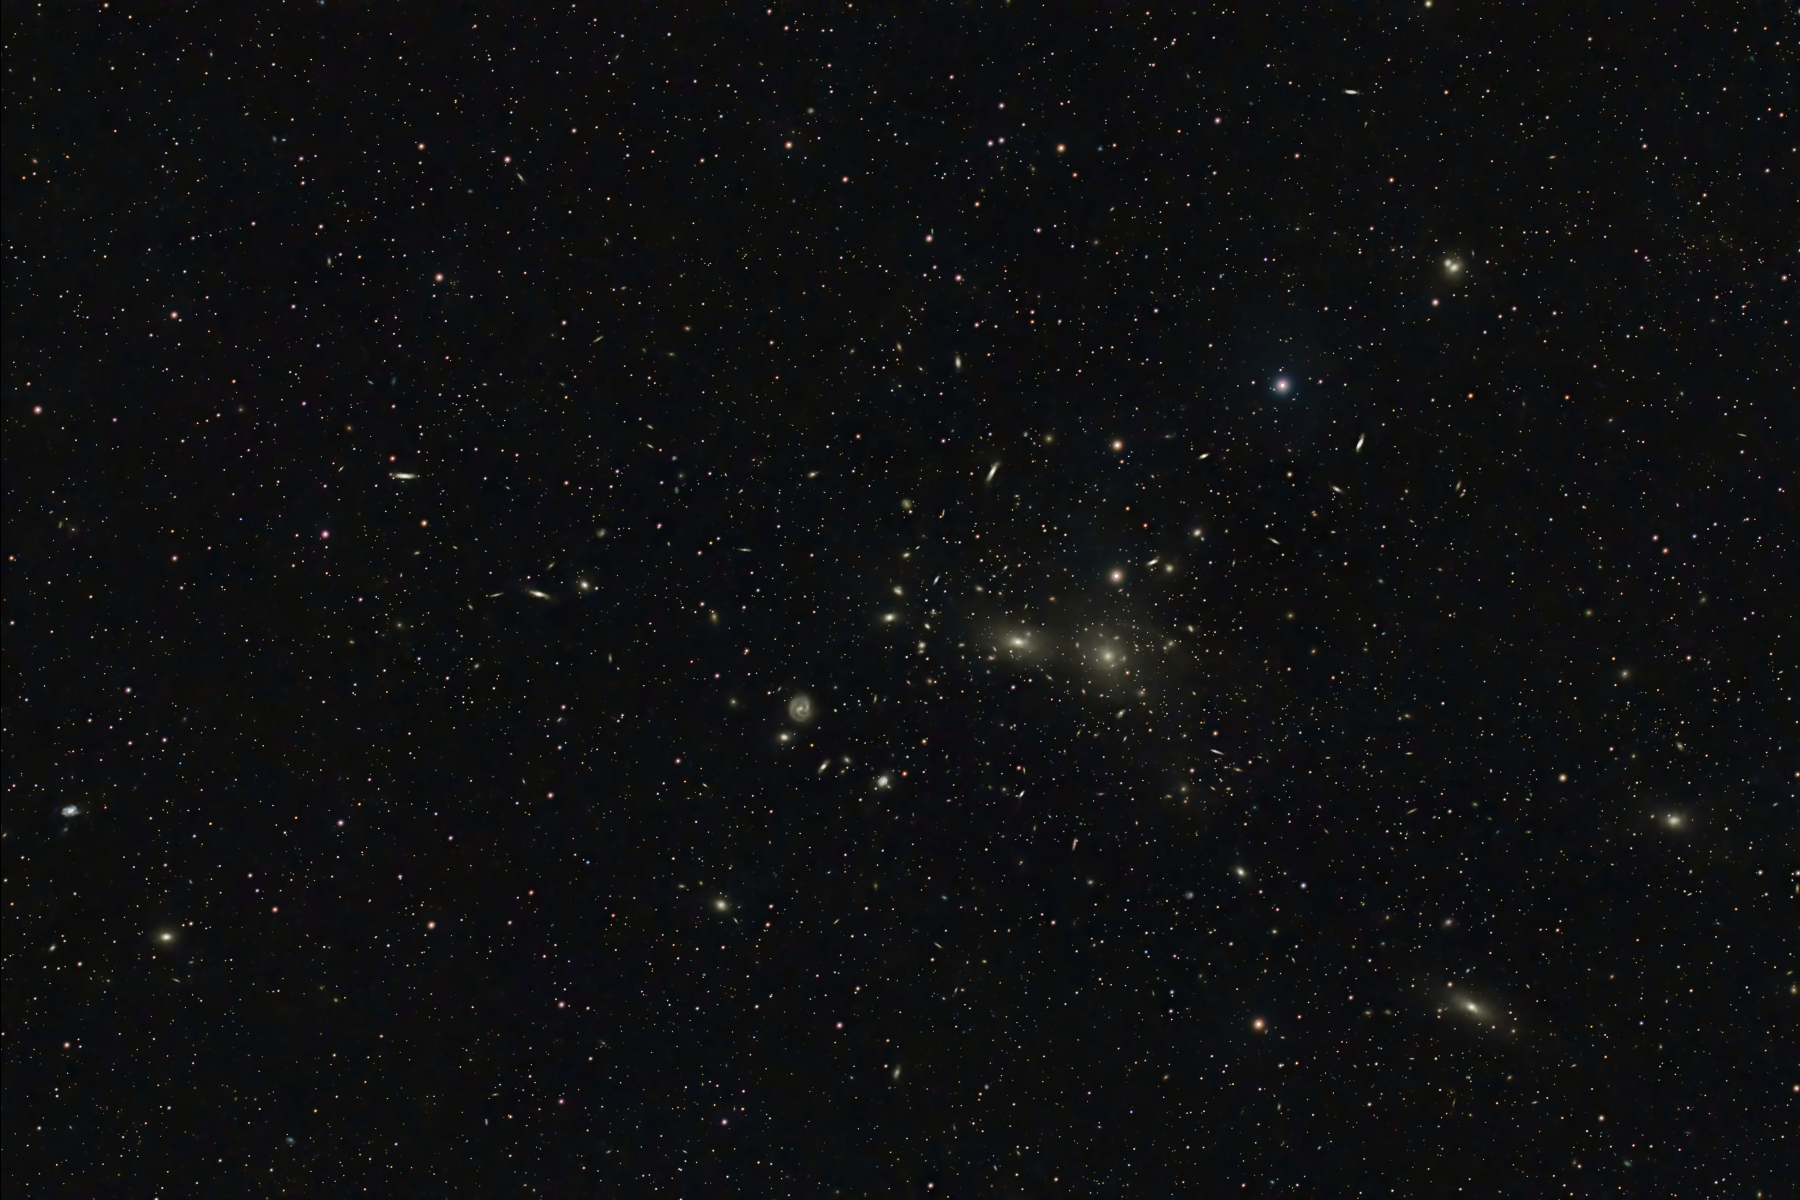 NGC 4889, The Coma Cluster